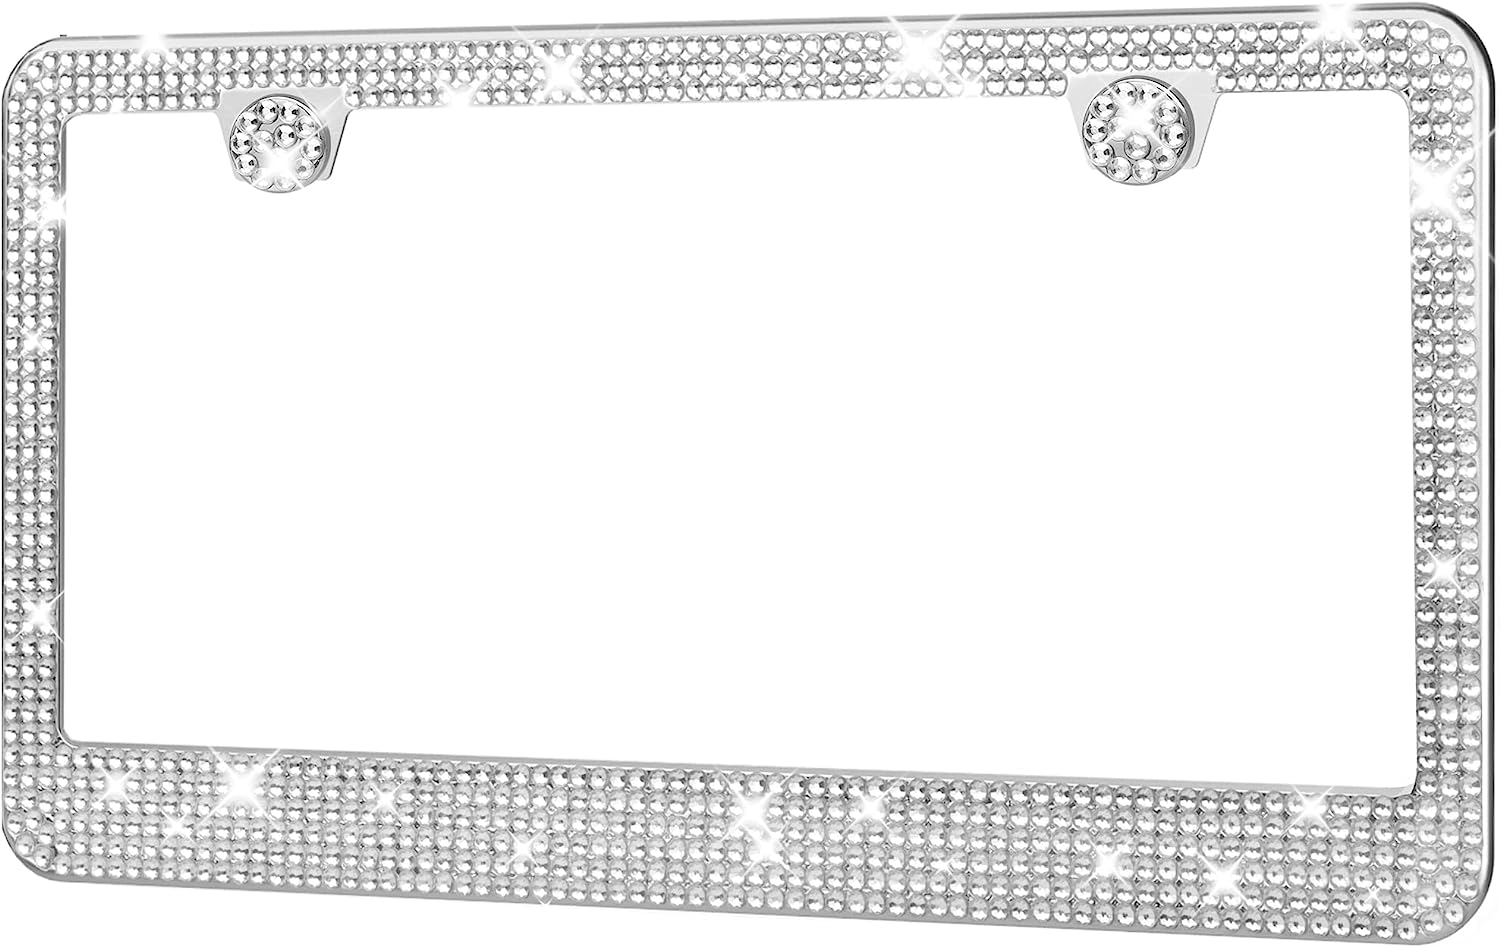 HOTOR License Plate Frame - Lastingly Bling and Sparkly License Plate Frame for Women, Stainless Steel & Obstruction-Free Frame with Multifaceted Rhinestones White